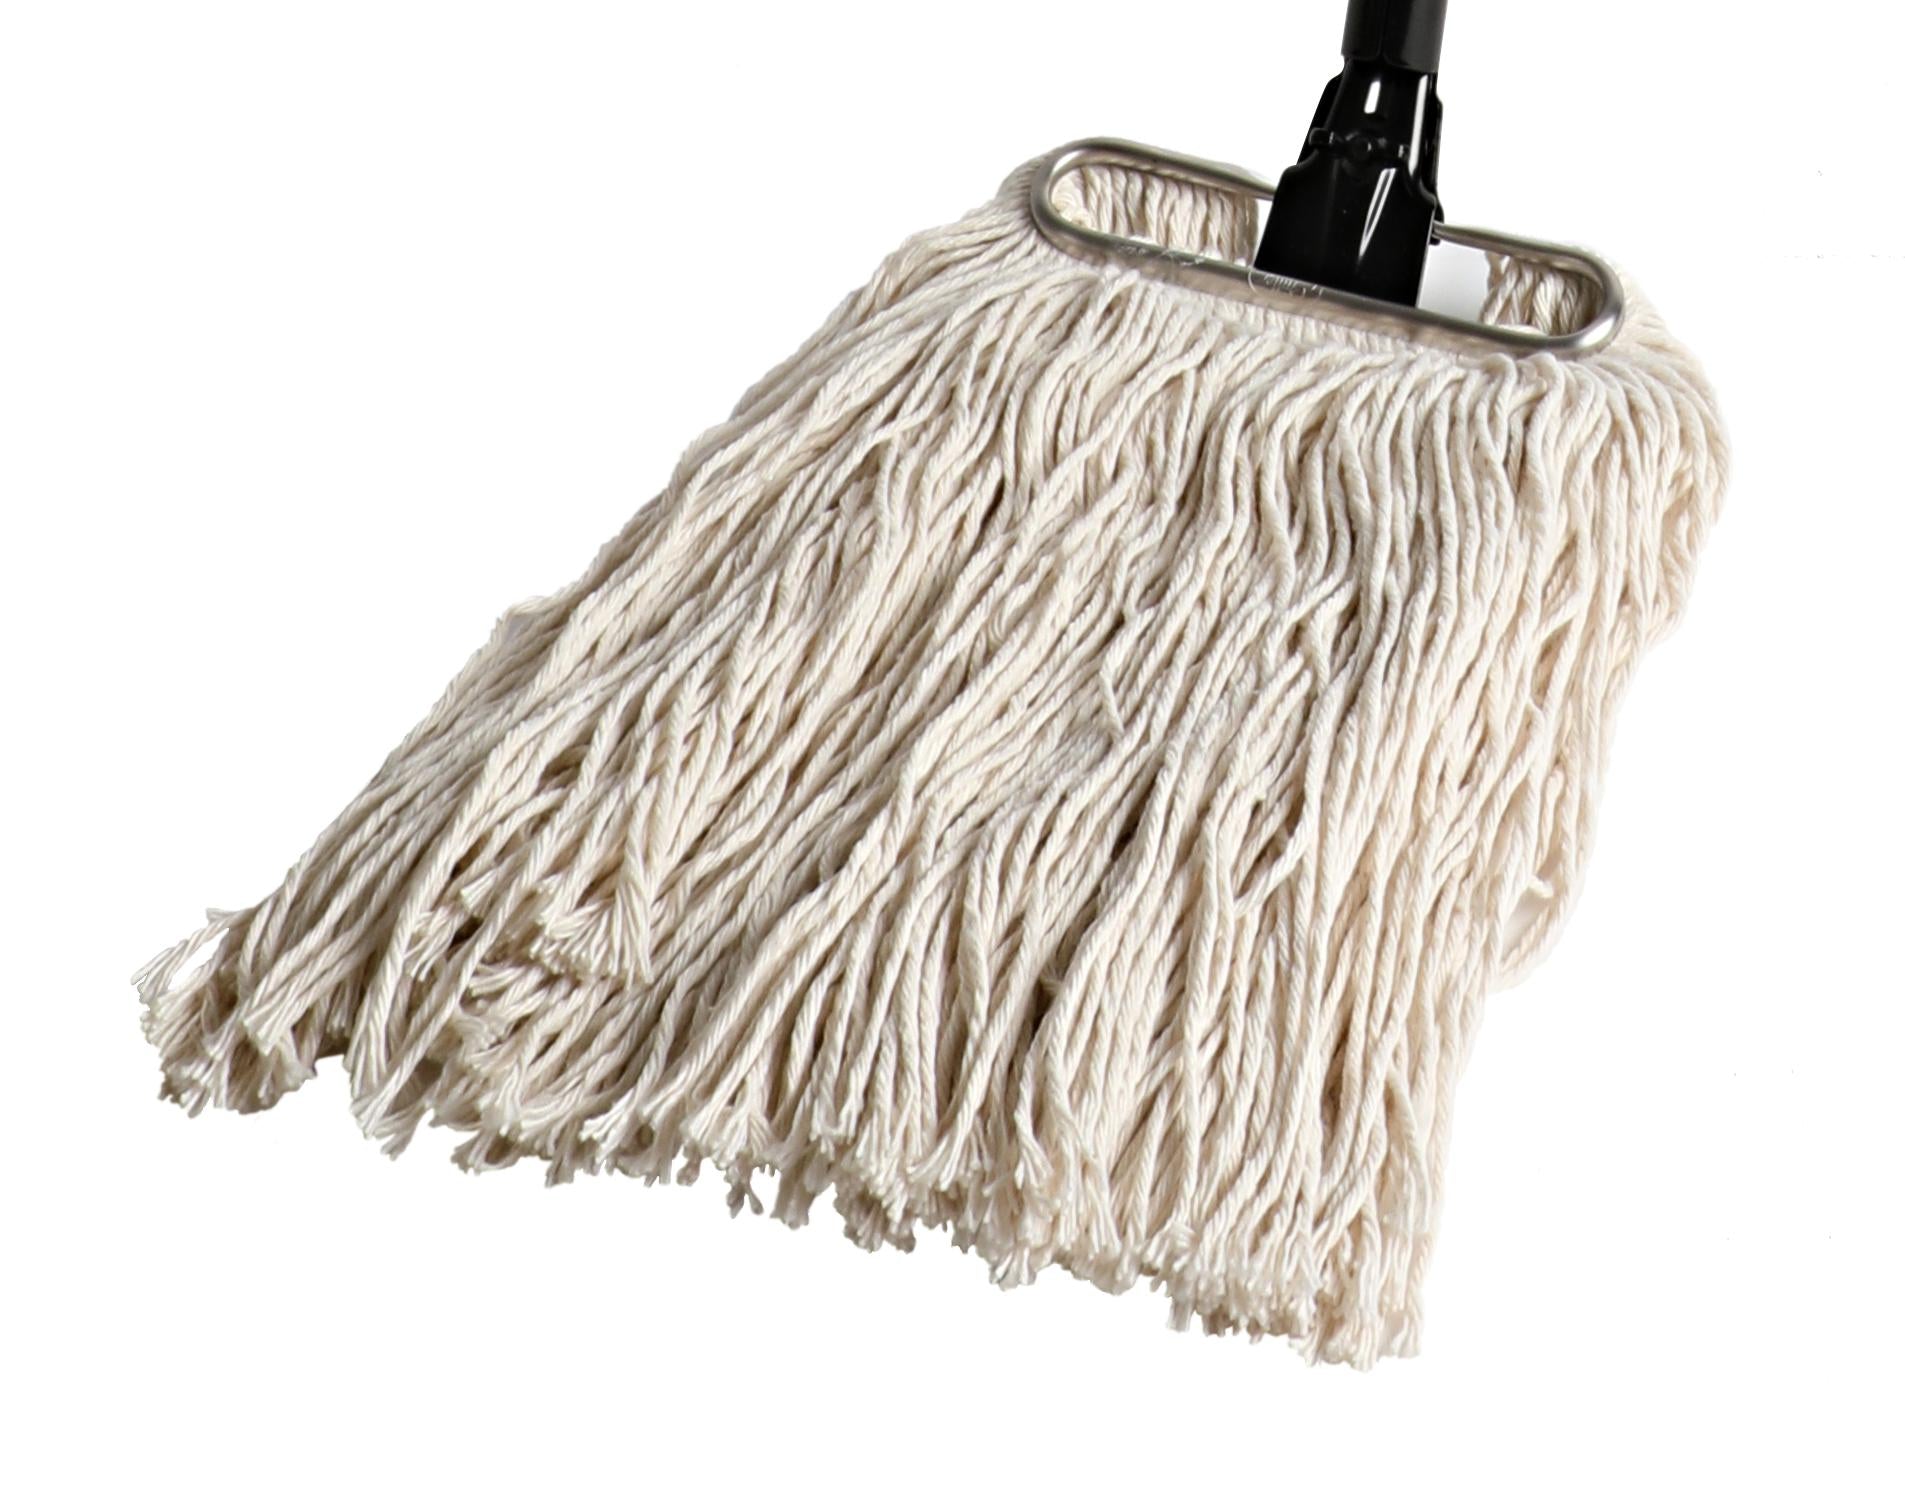 https://fuller.com/cdn/shop/products/wet-mop-replacement-head-absorbent-professional-quality-cotton-yarn-floor-cleaner-mops_1905x1497.jpg?v=1596015989